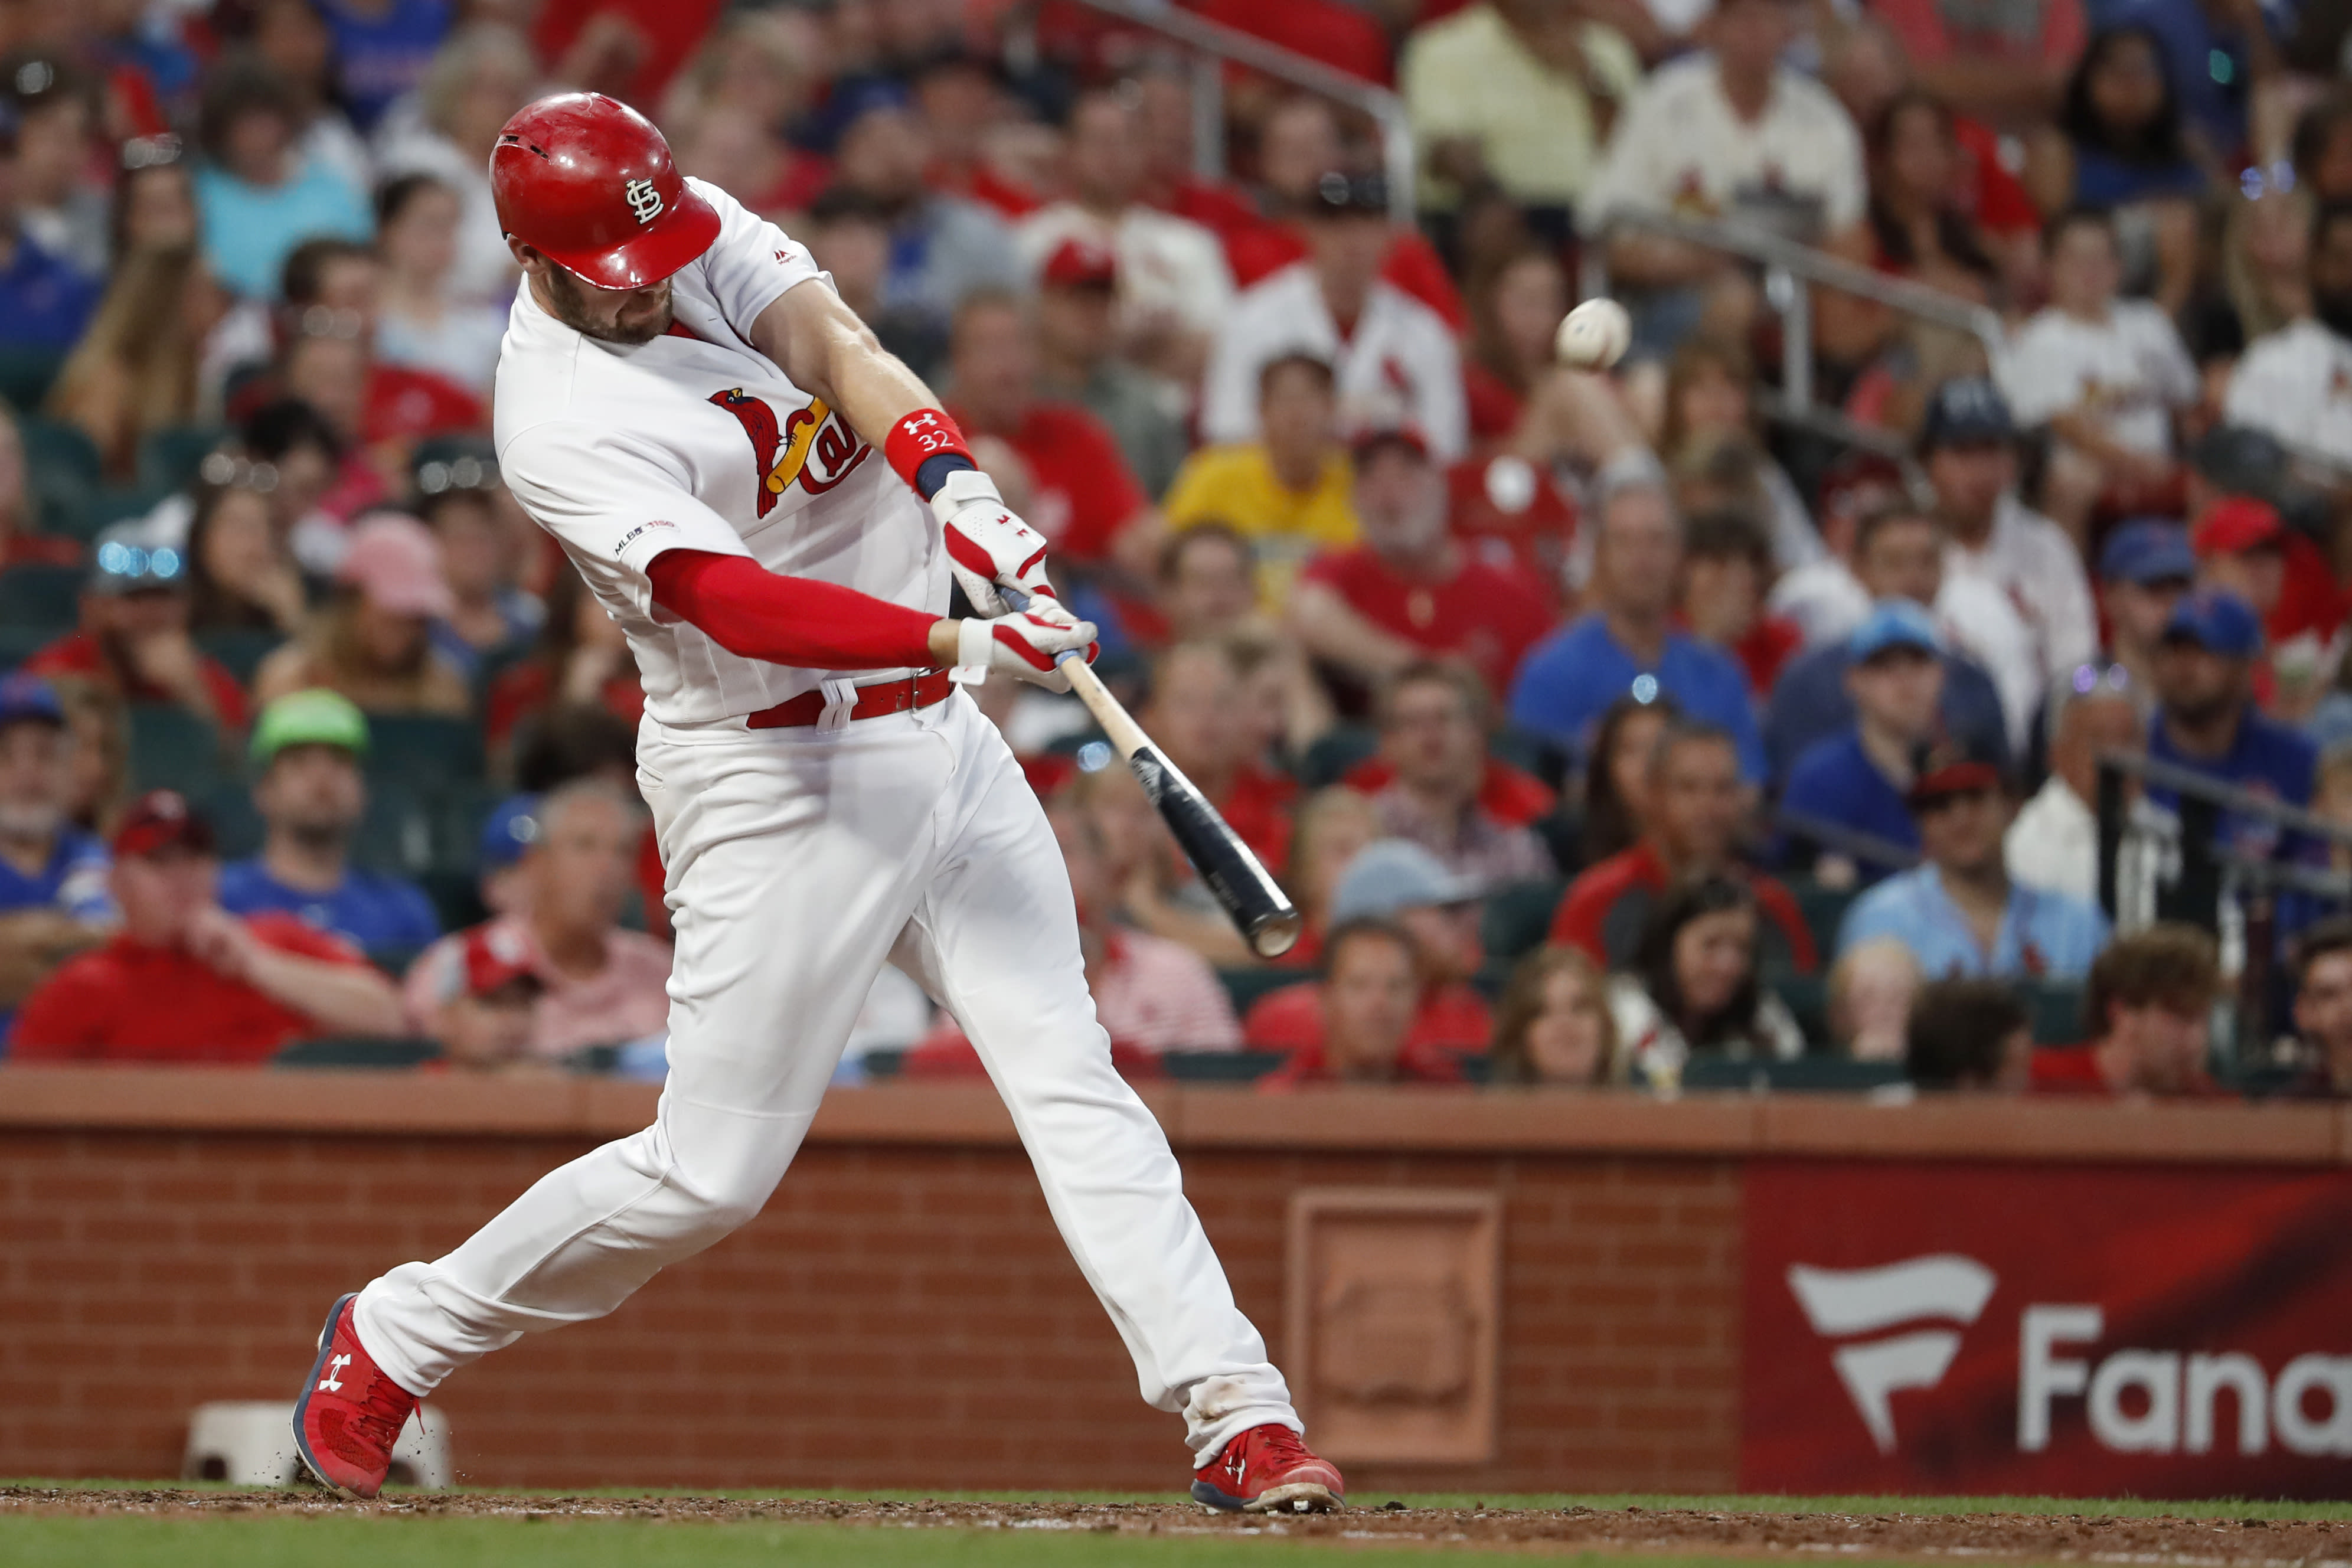 Cardinals beat Cubs 8-0, move into 1st place in NL Central